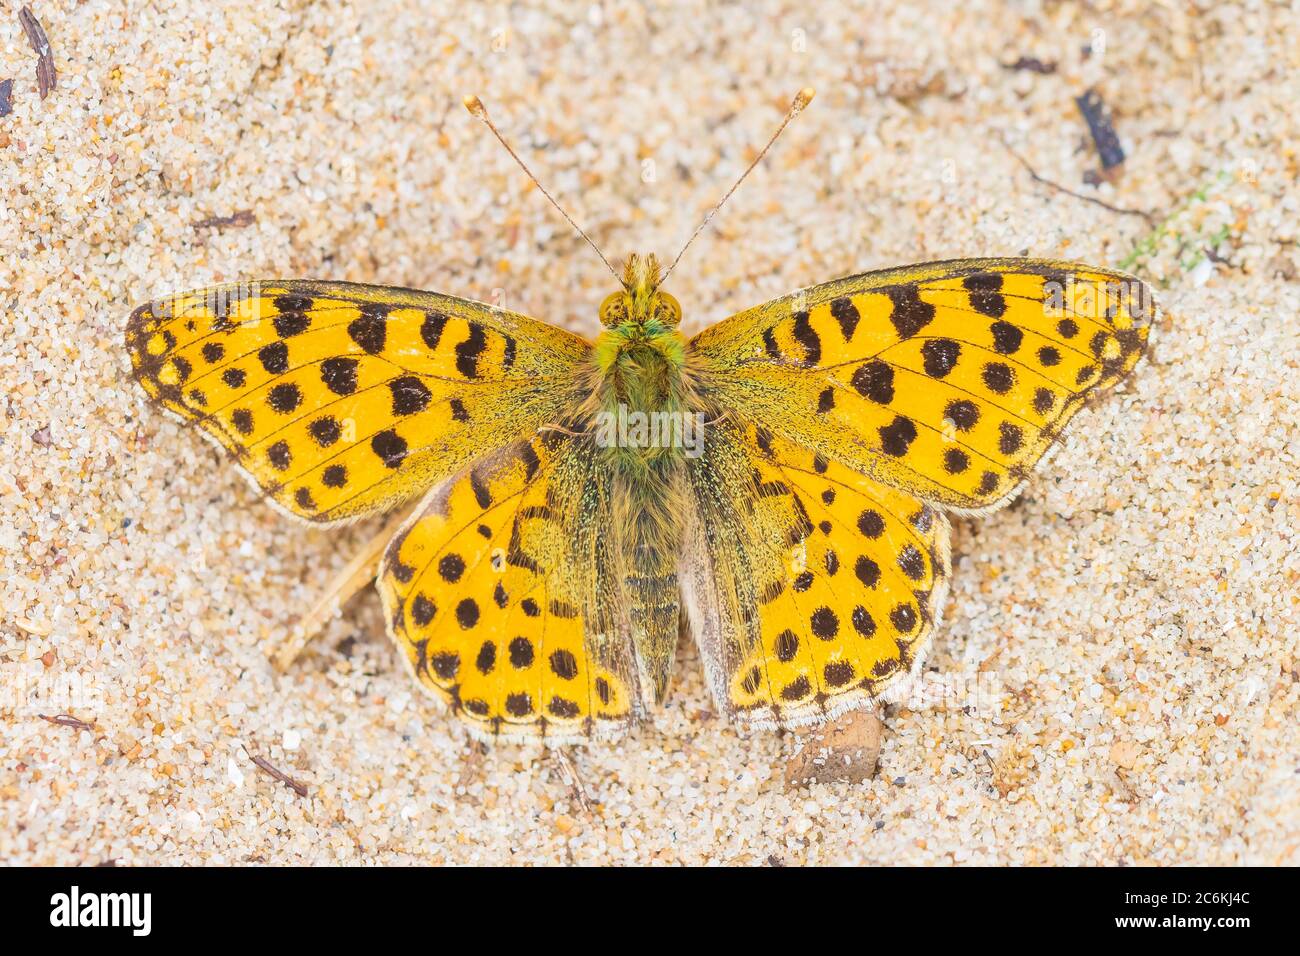 Queen of spain fritillary, issoria lathonia, butterfly resting in a meadow. Coastal dunes landscape, daytime bright sunlight. Stock Photo